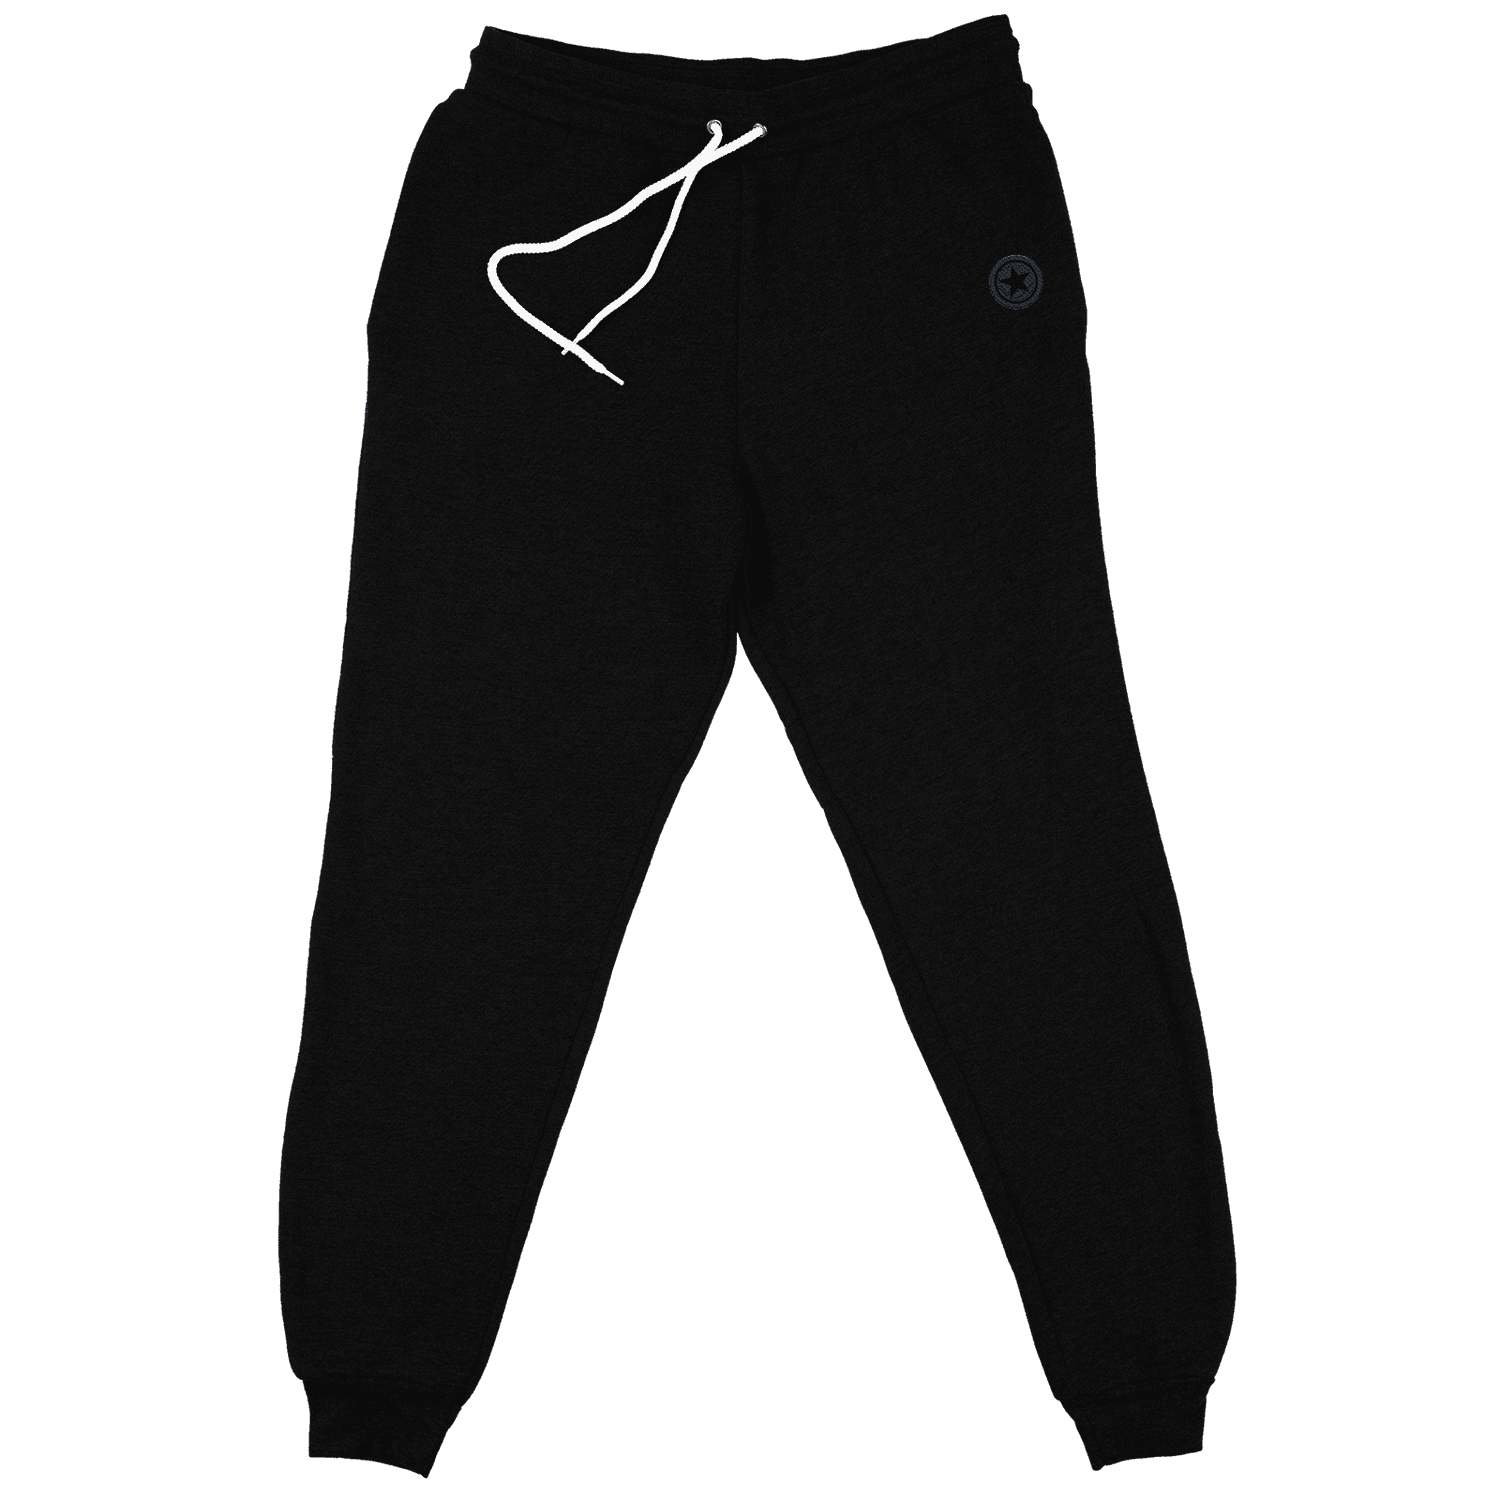 Falcon and Winter Soldier Unisex Joggers - Black